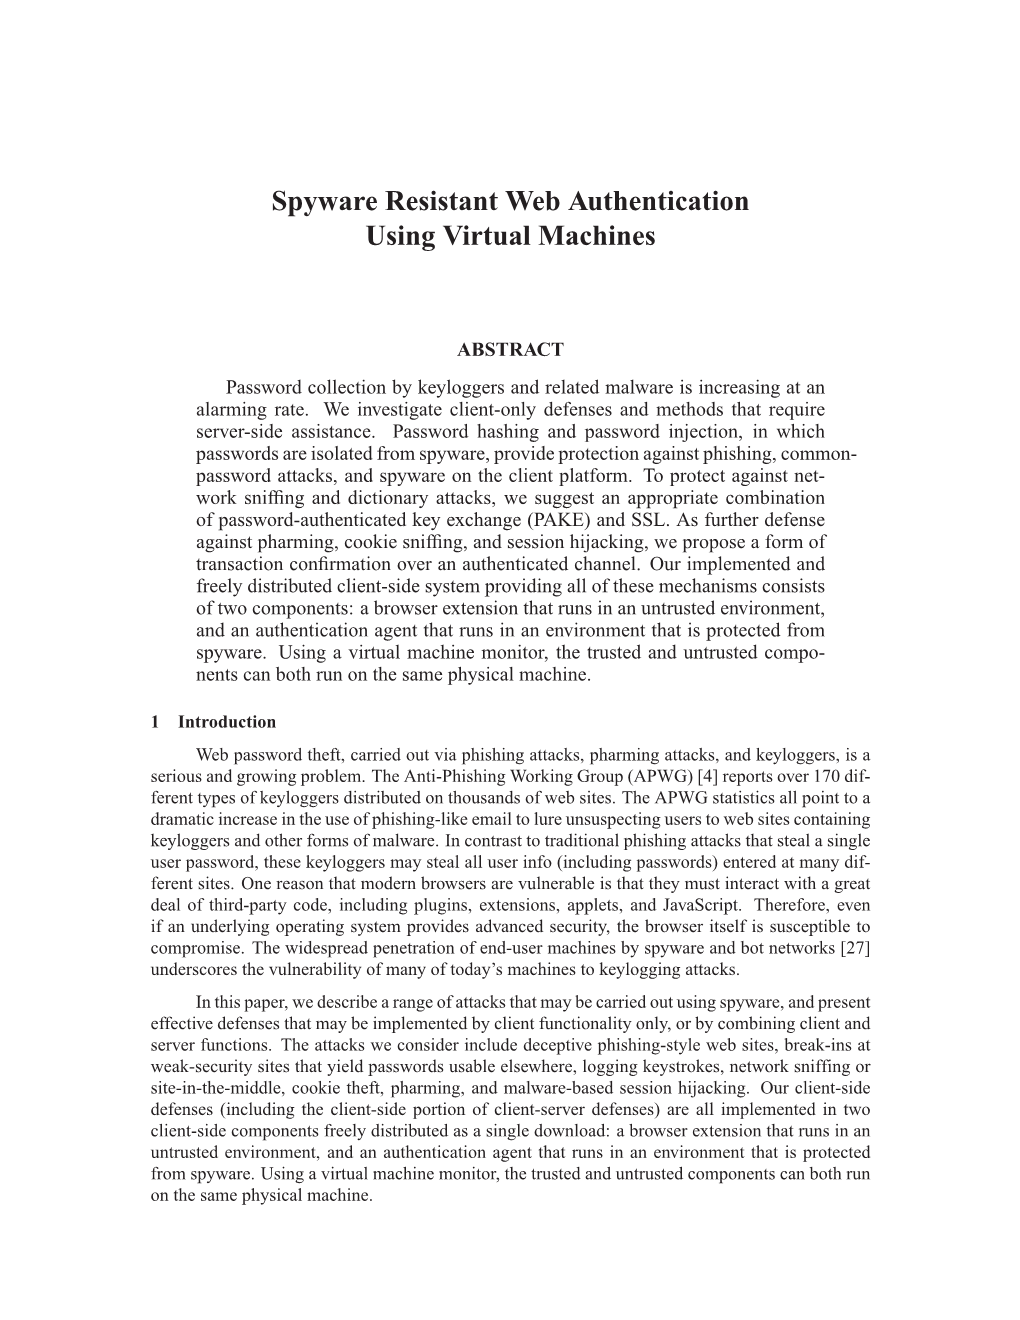 Spyware Resistant Web Authentication Using Virtual Machines